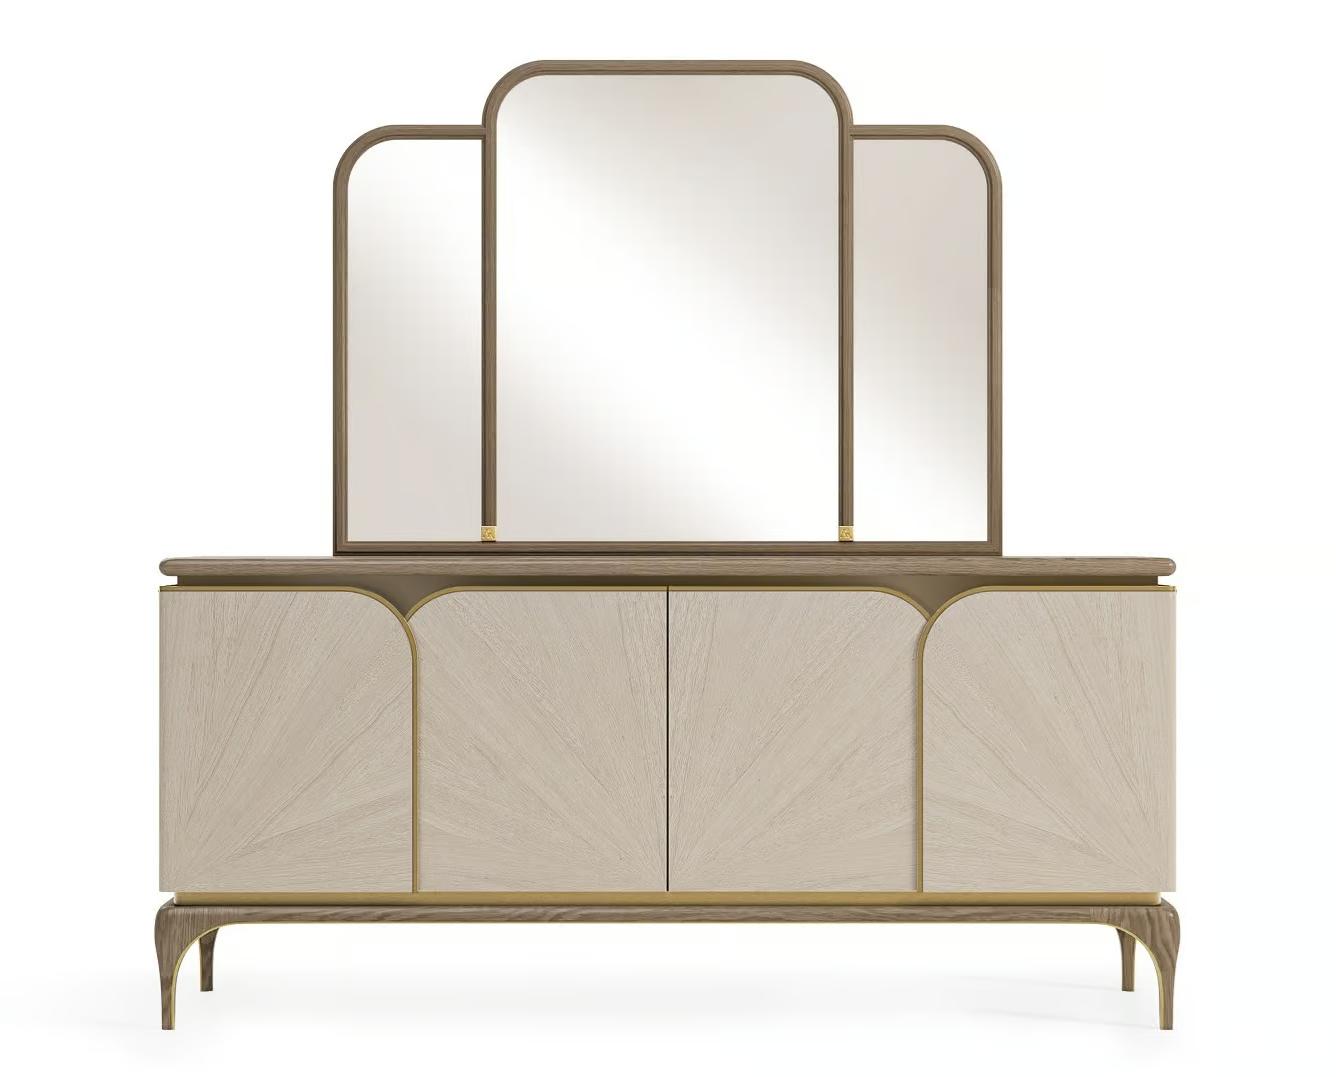 Delux Italian Sideboard ☞ Configuration: With Mirror